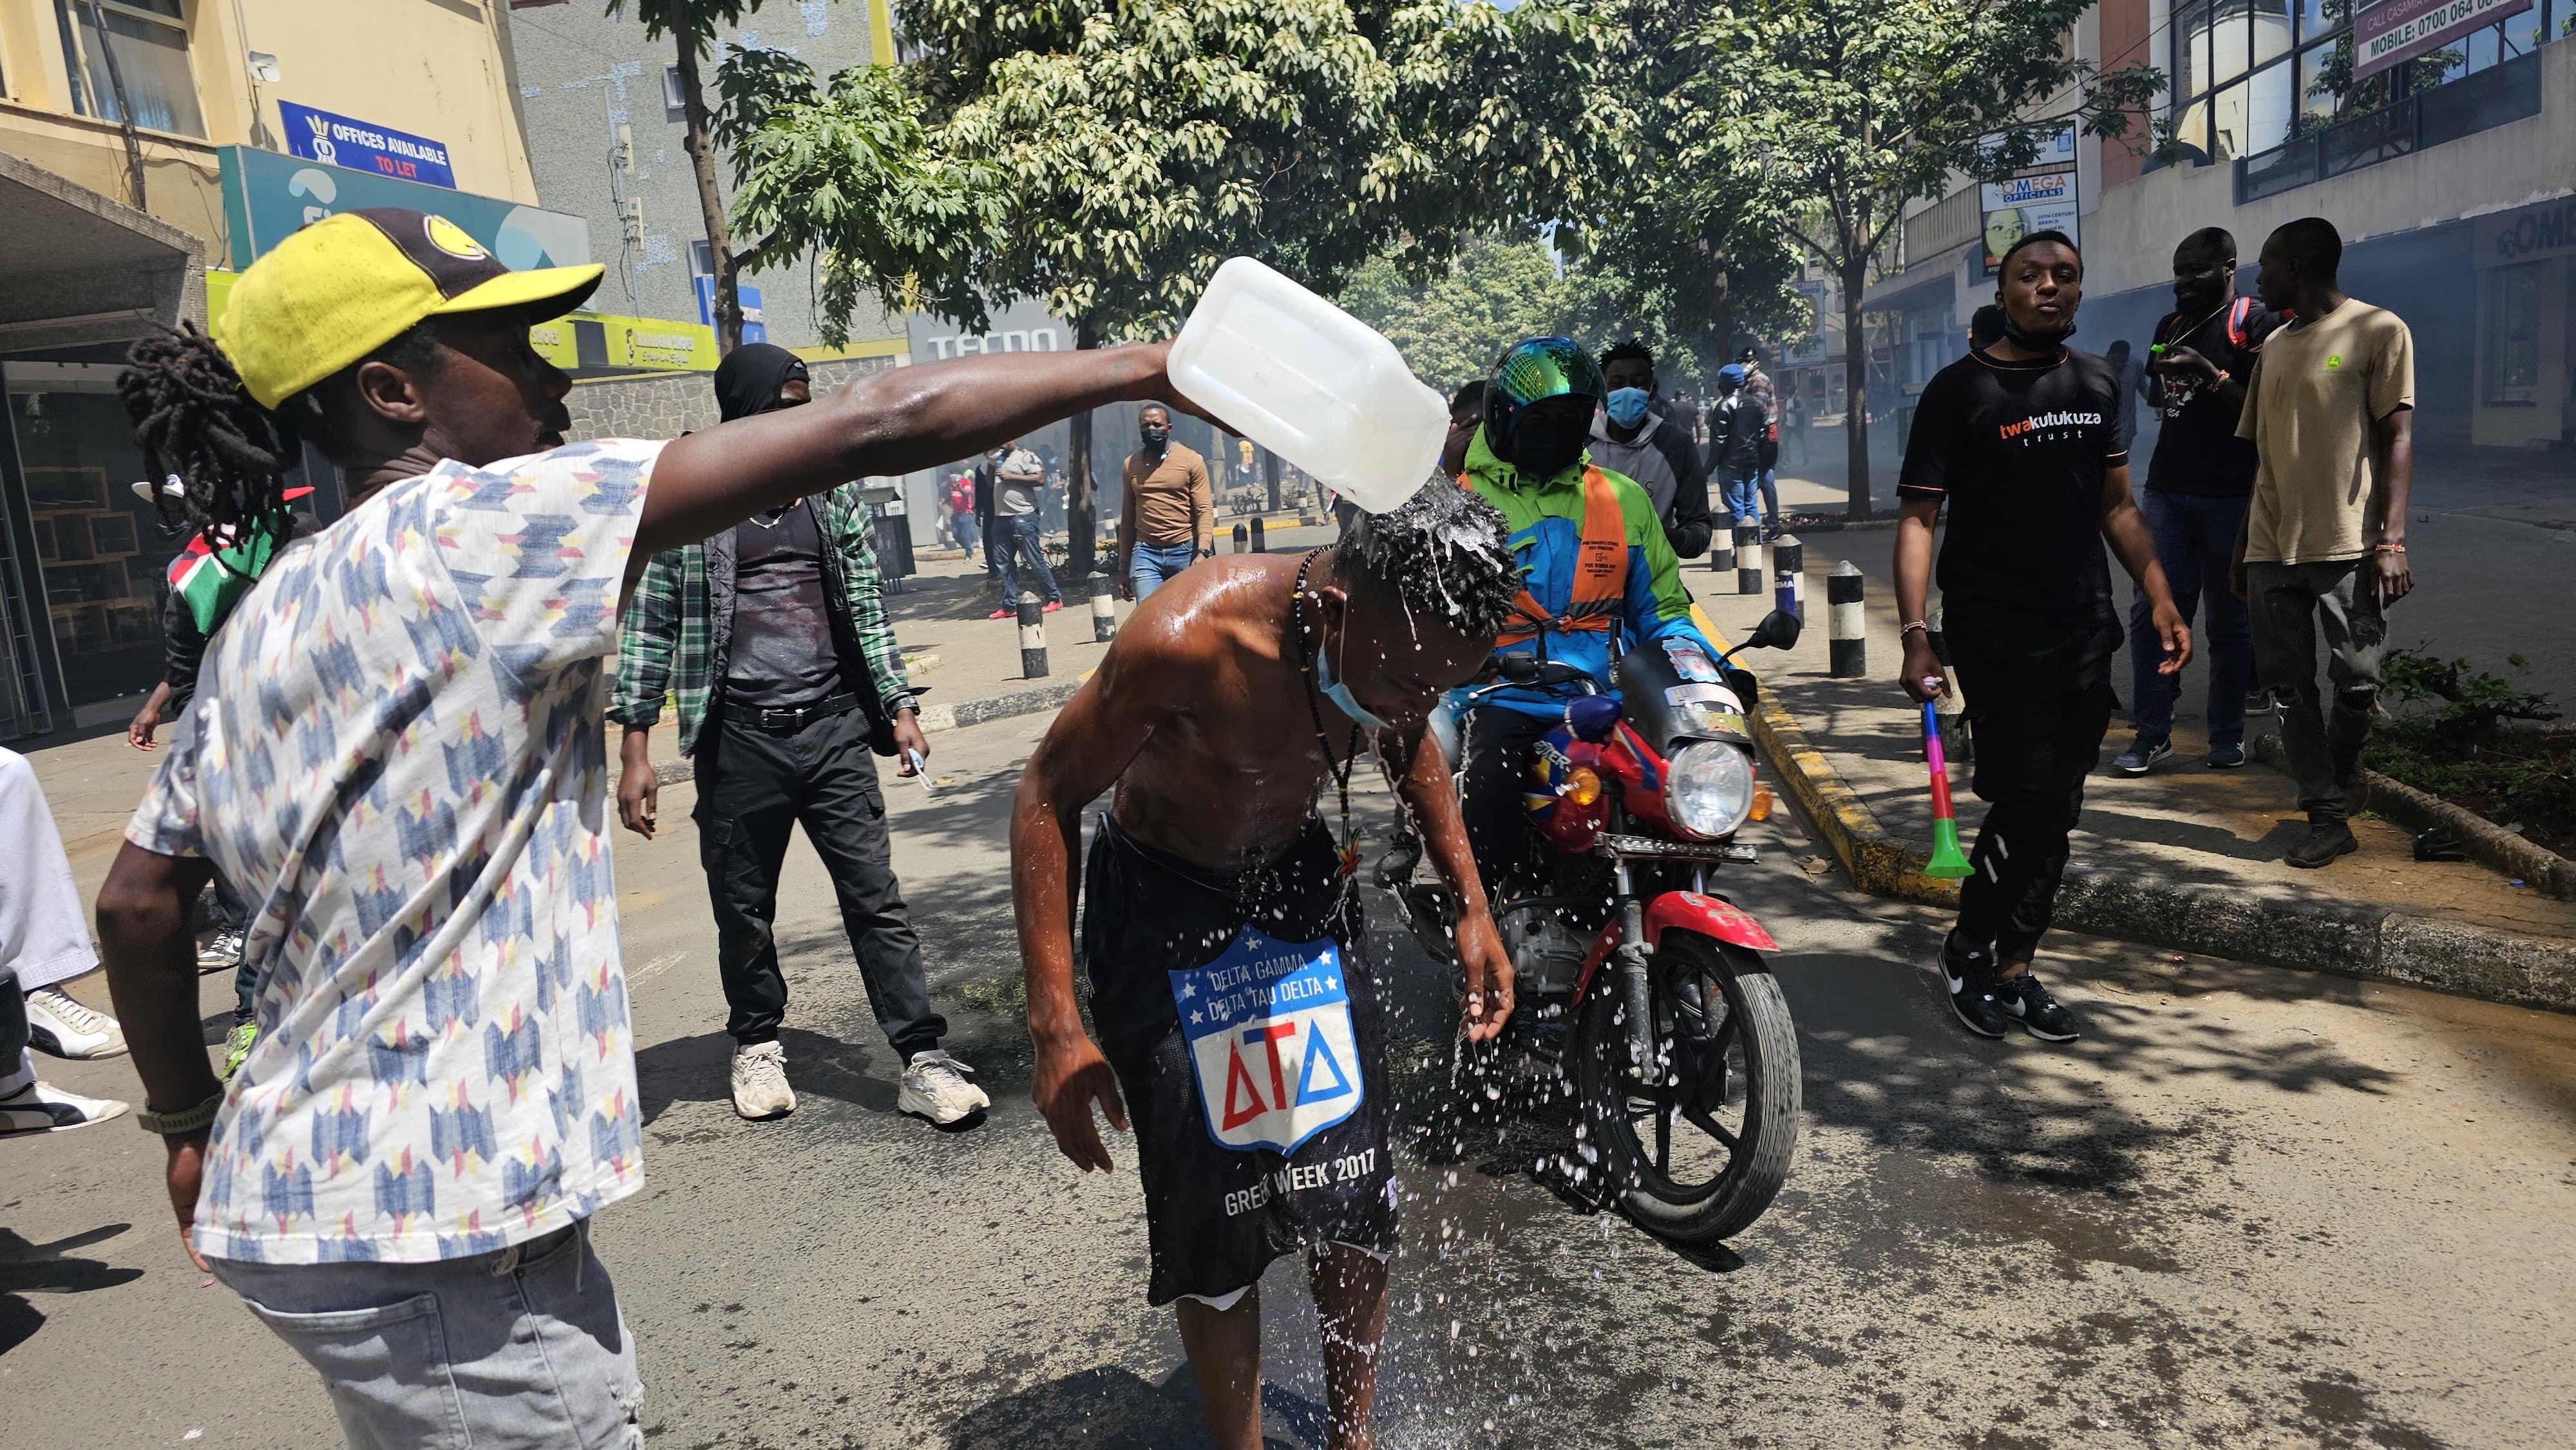 One protester pour water for im mate head for di Kenya waka against tax increase